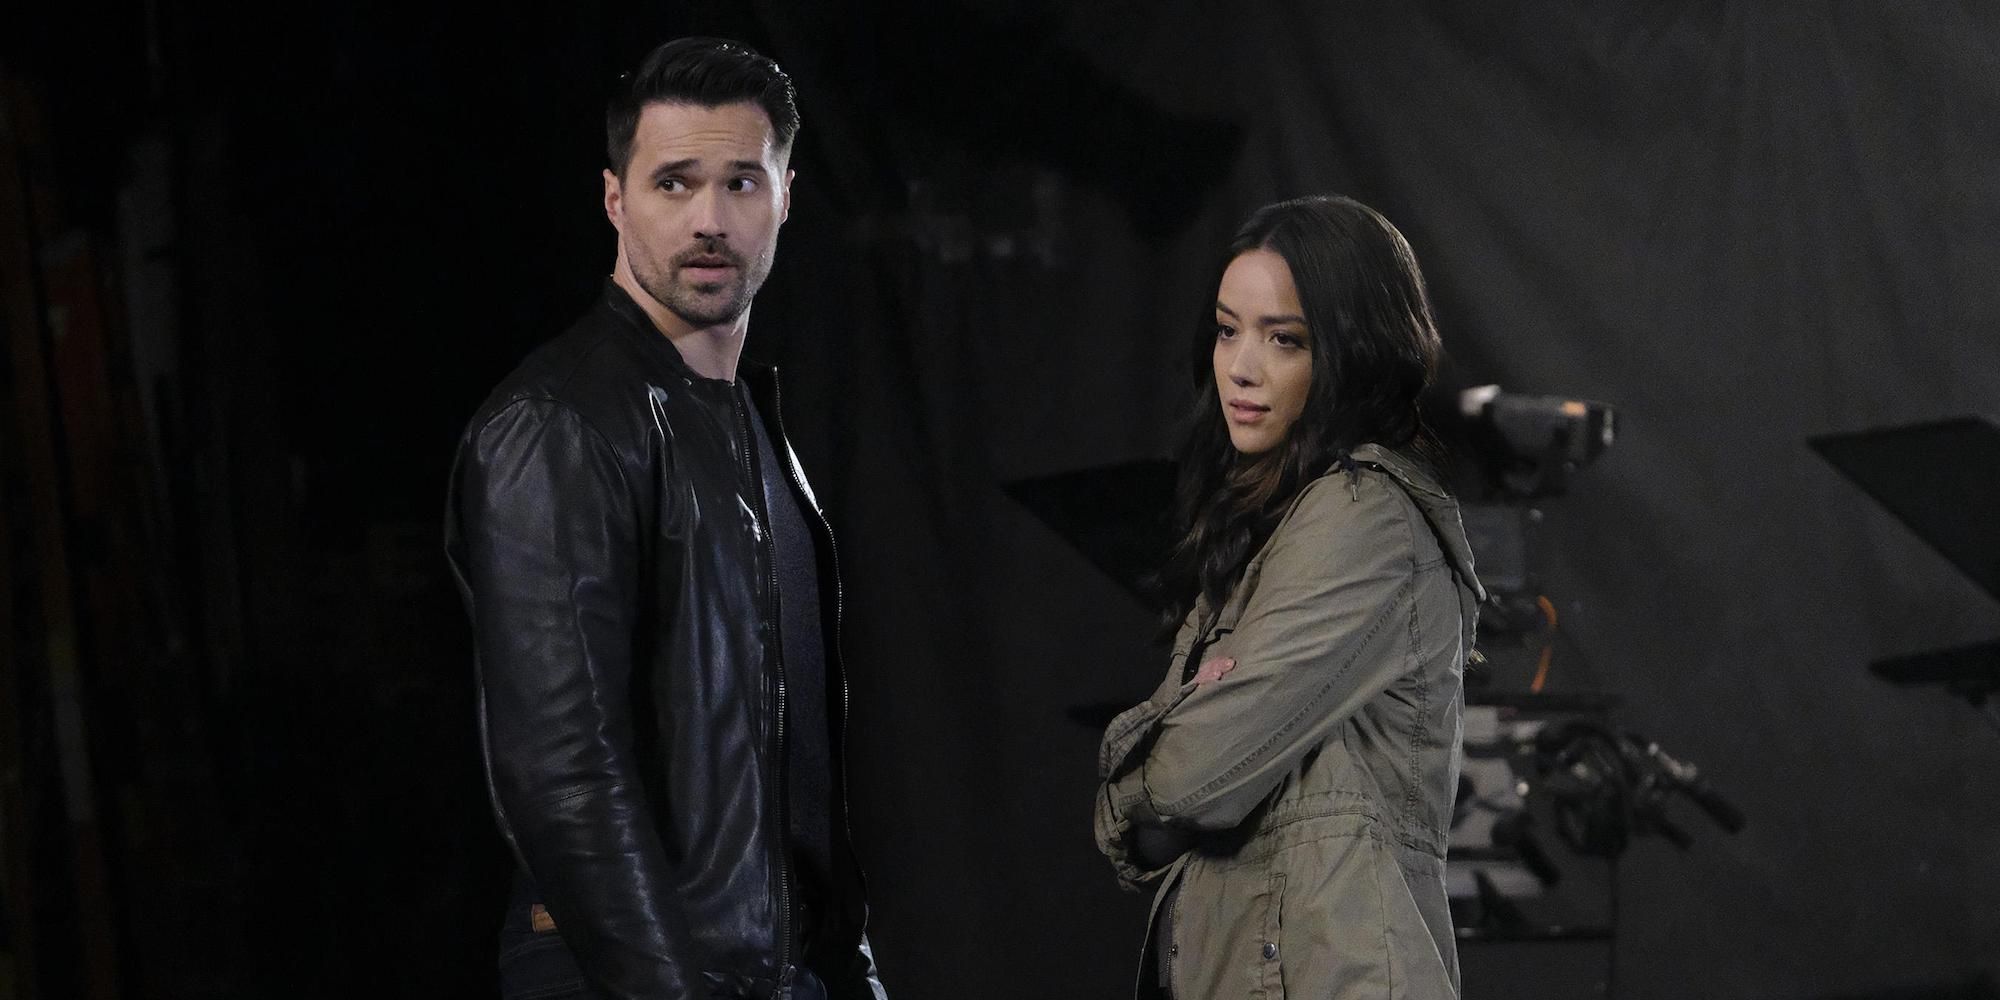 Agents of SHIELD All the Madames Men Review & Discussion